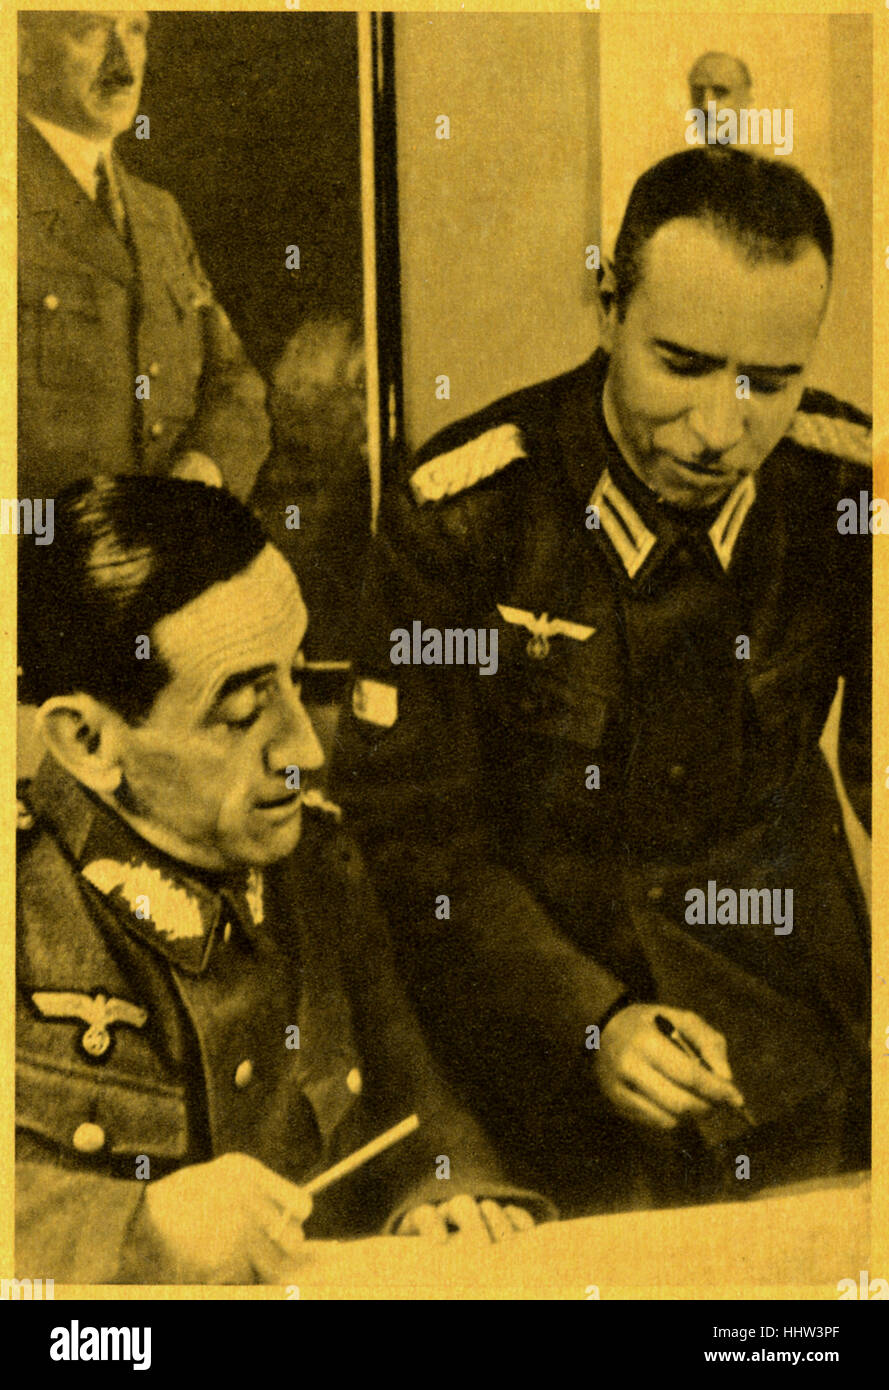 At the Headquartes of the Eastern front during World War 2. General Muñoz Grande and Liutenant Colonel Romero Magariegos wearing the uniform of the German Army. (Original caption in Spanish: En el Cuatel General del frente oriental; El general Muñoz Grande y el teniente coronel Romero Magariegos). From series of cards called The European Crusade against Bolshevism: The Blue Brigade (picture 2) / La cruzada europea contra el bolchevismo. La División Azul. La División Azul was unit of Spanish and Portuguese volunteers that served in the German Army on the Eastern Front of the Second World War. Stock Photo